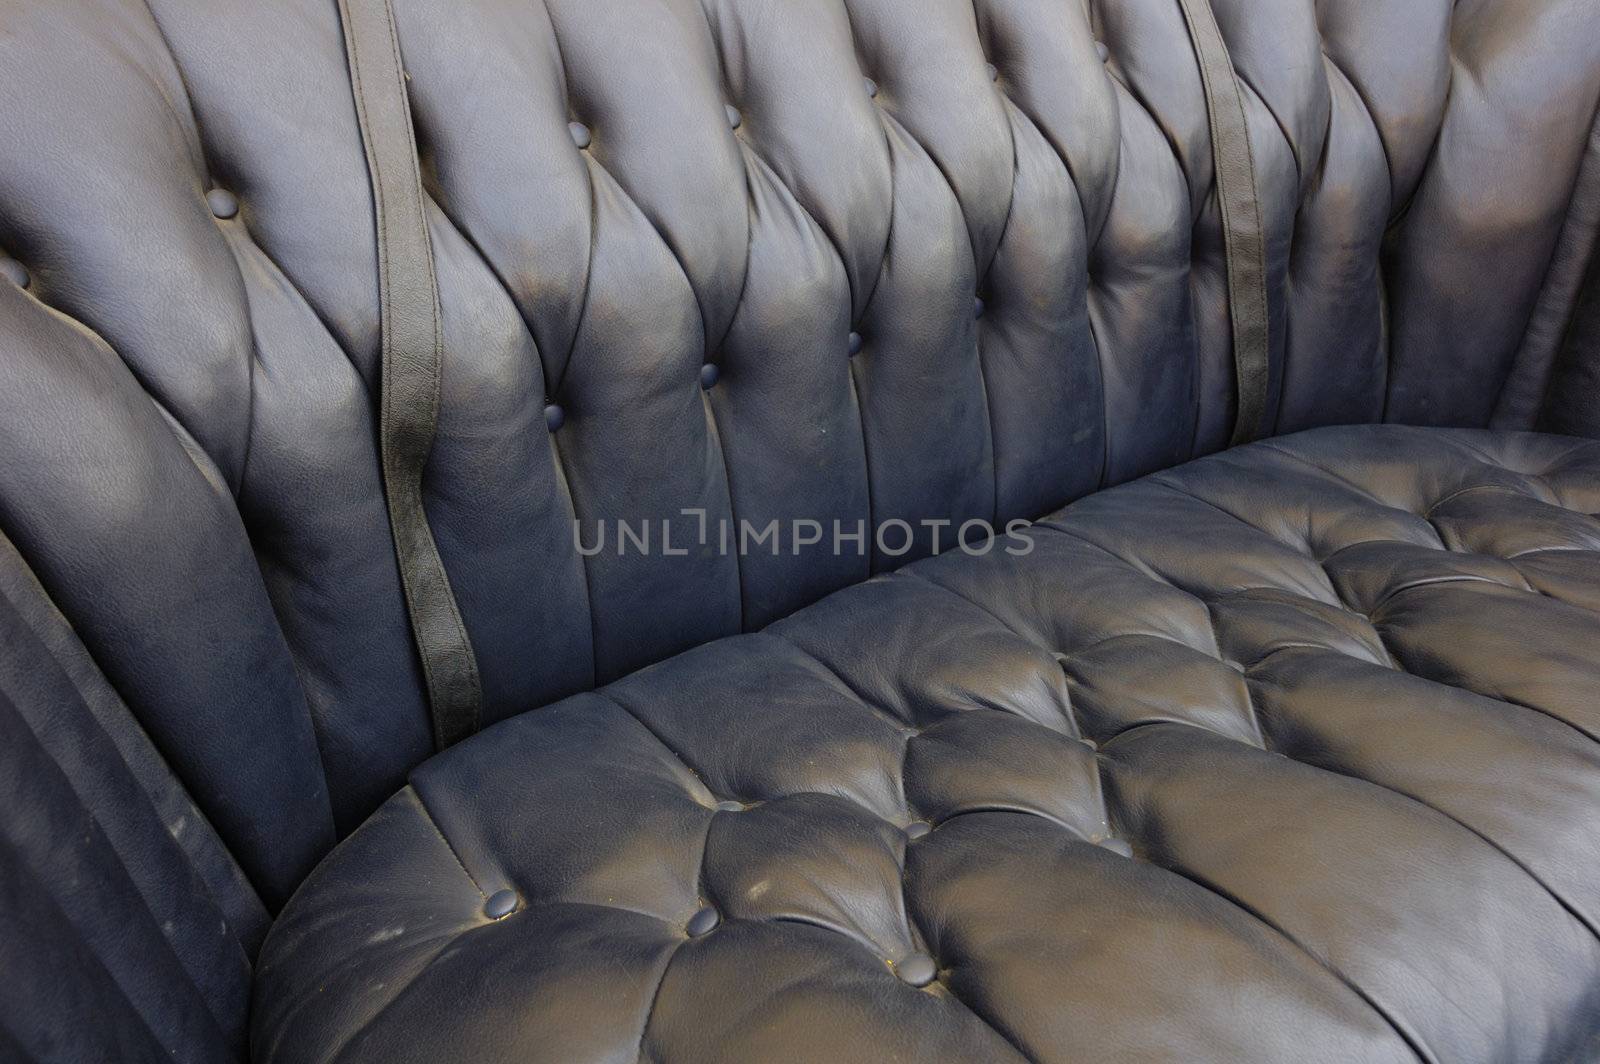 Close-up of an old seat upholstered in black leather.